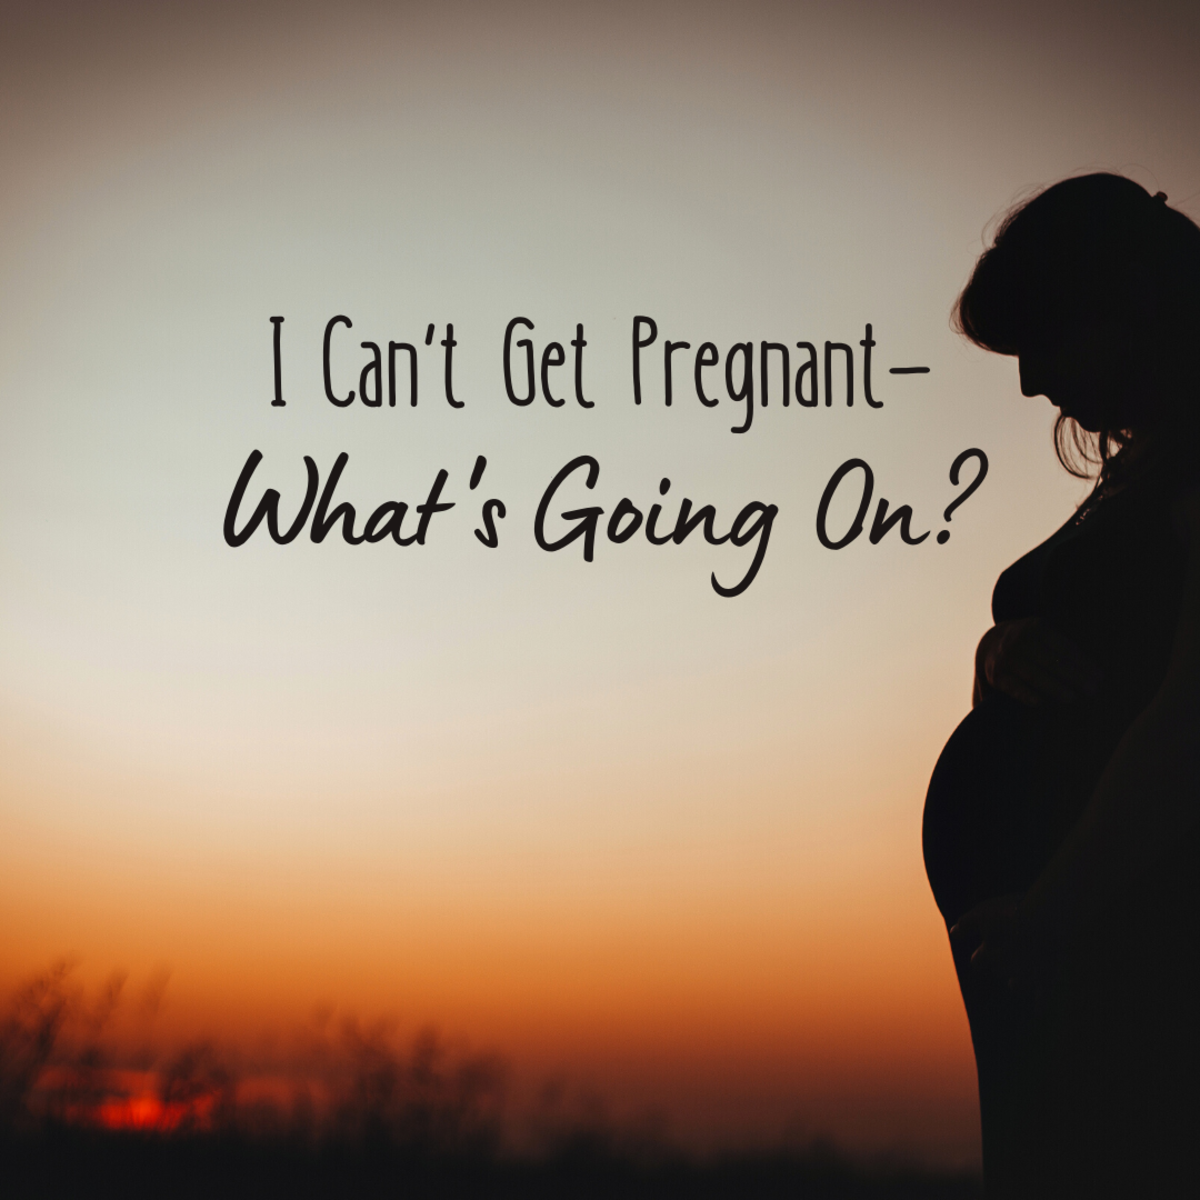 Are you having a hard time getting pregnant? Here are some ideas to help you conceive. 